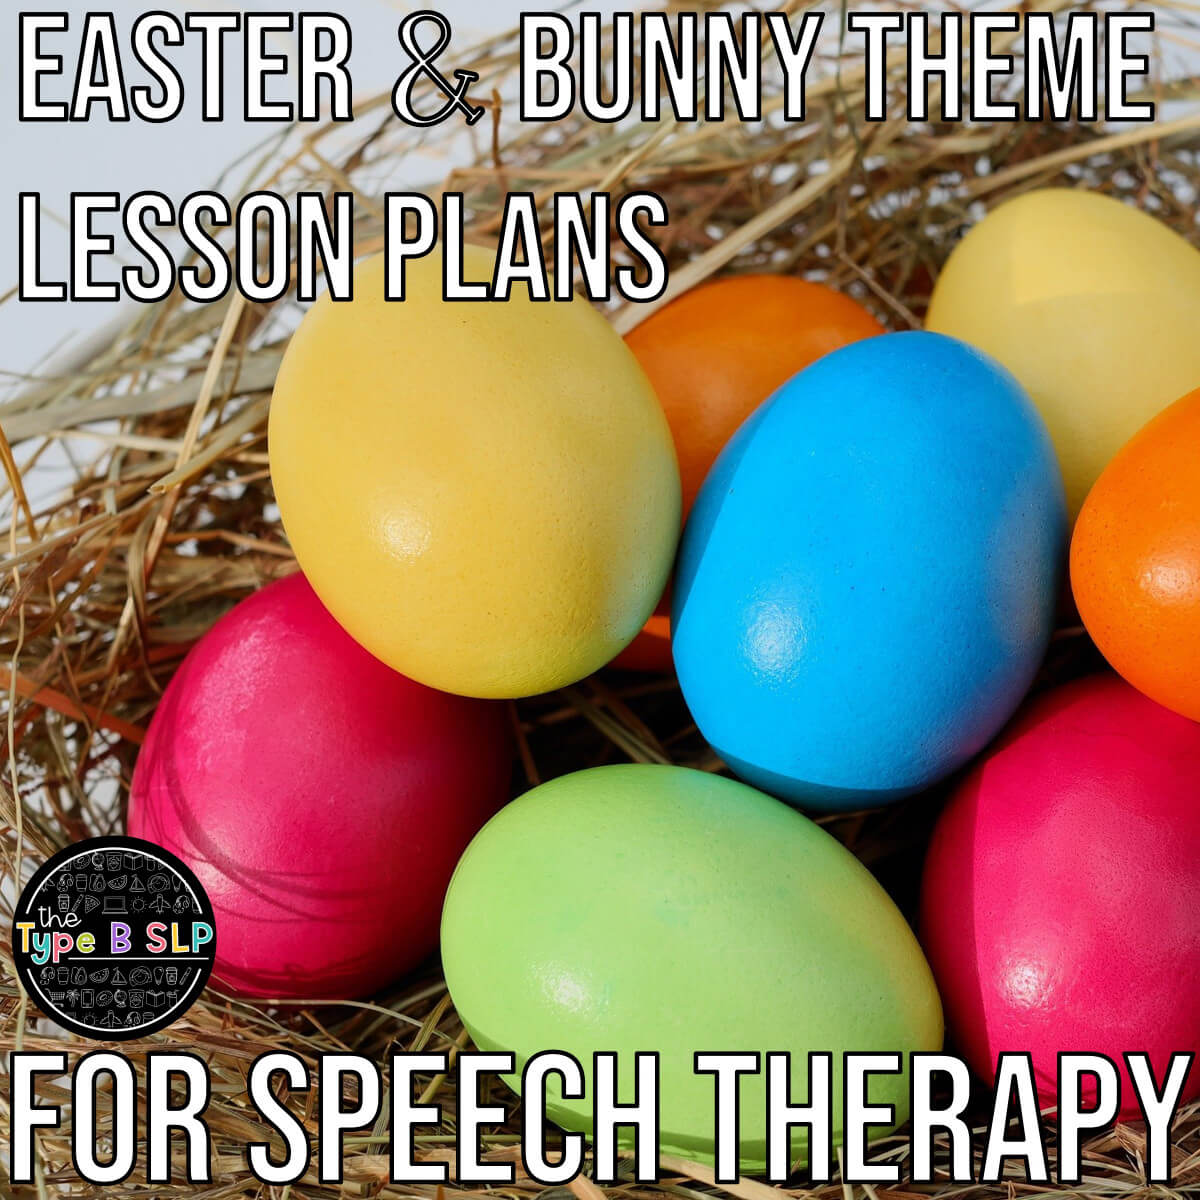 Easter & Bunny Theme Lesson Plans for Speech Therapy